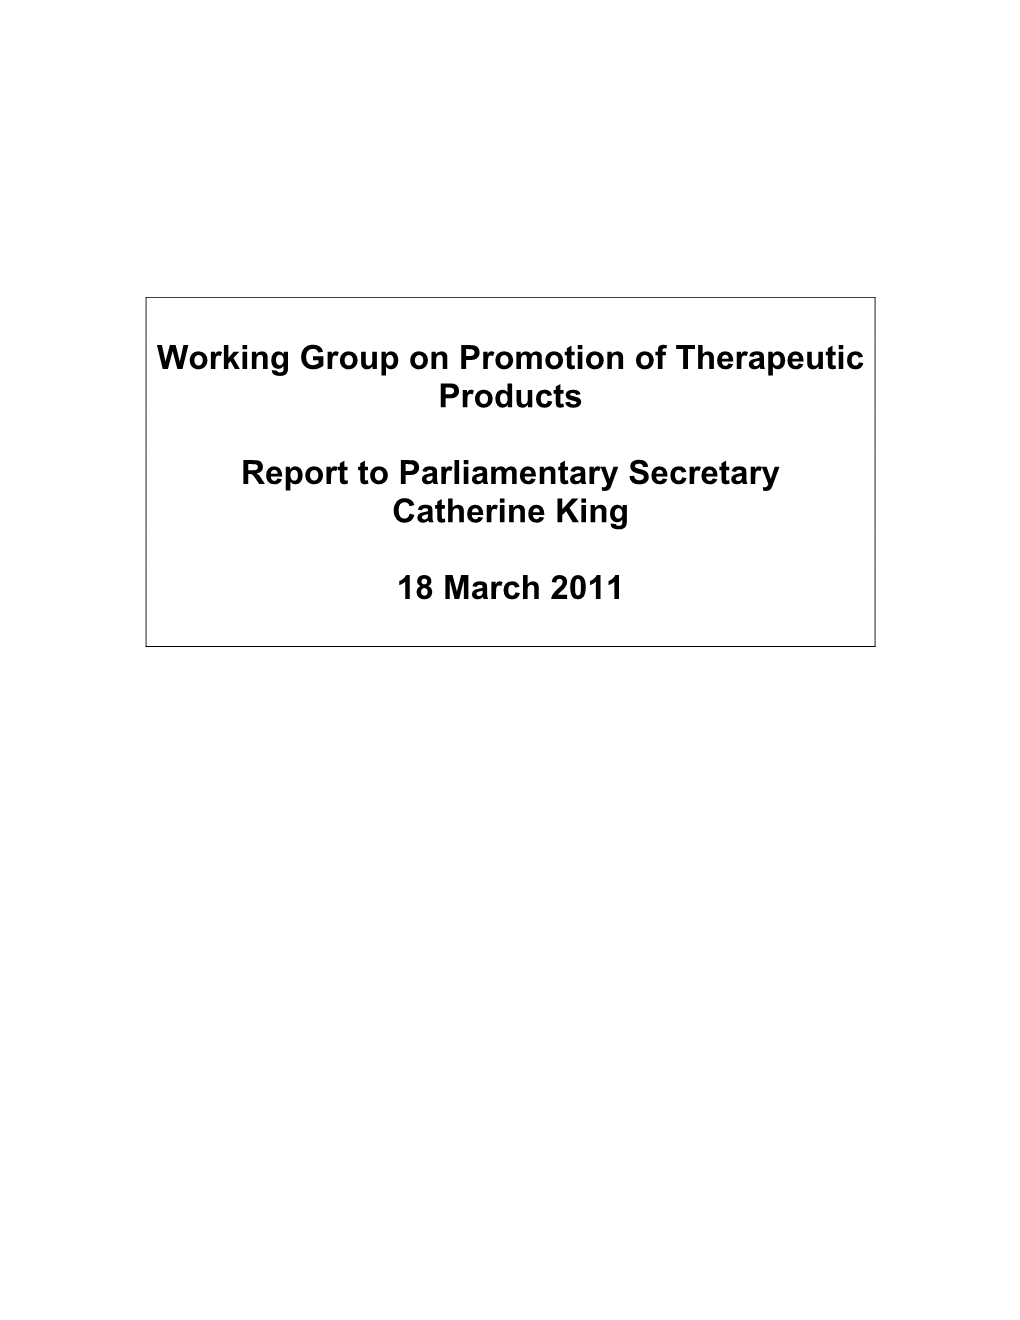 Working Group on Promotion of Therapeutic Products Report To